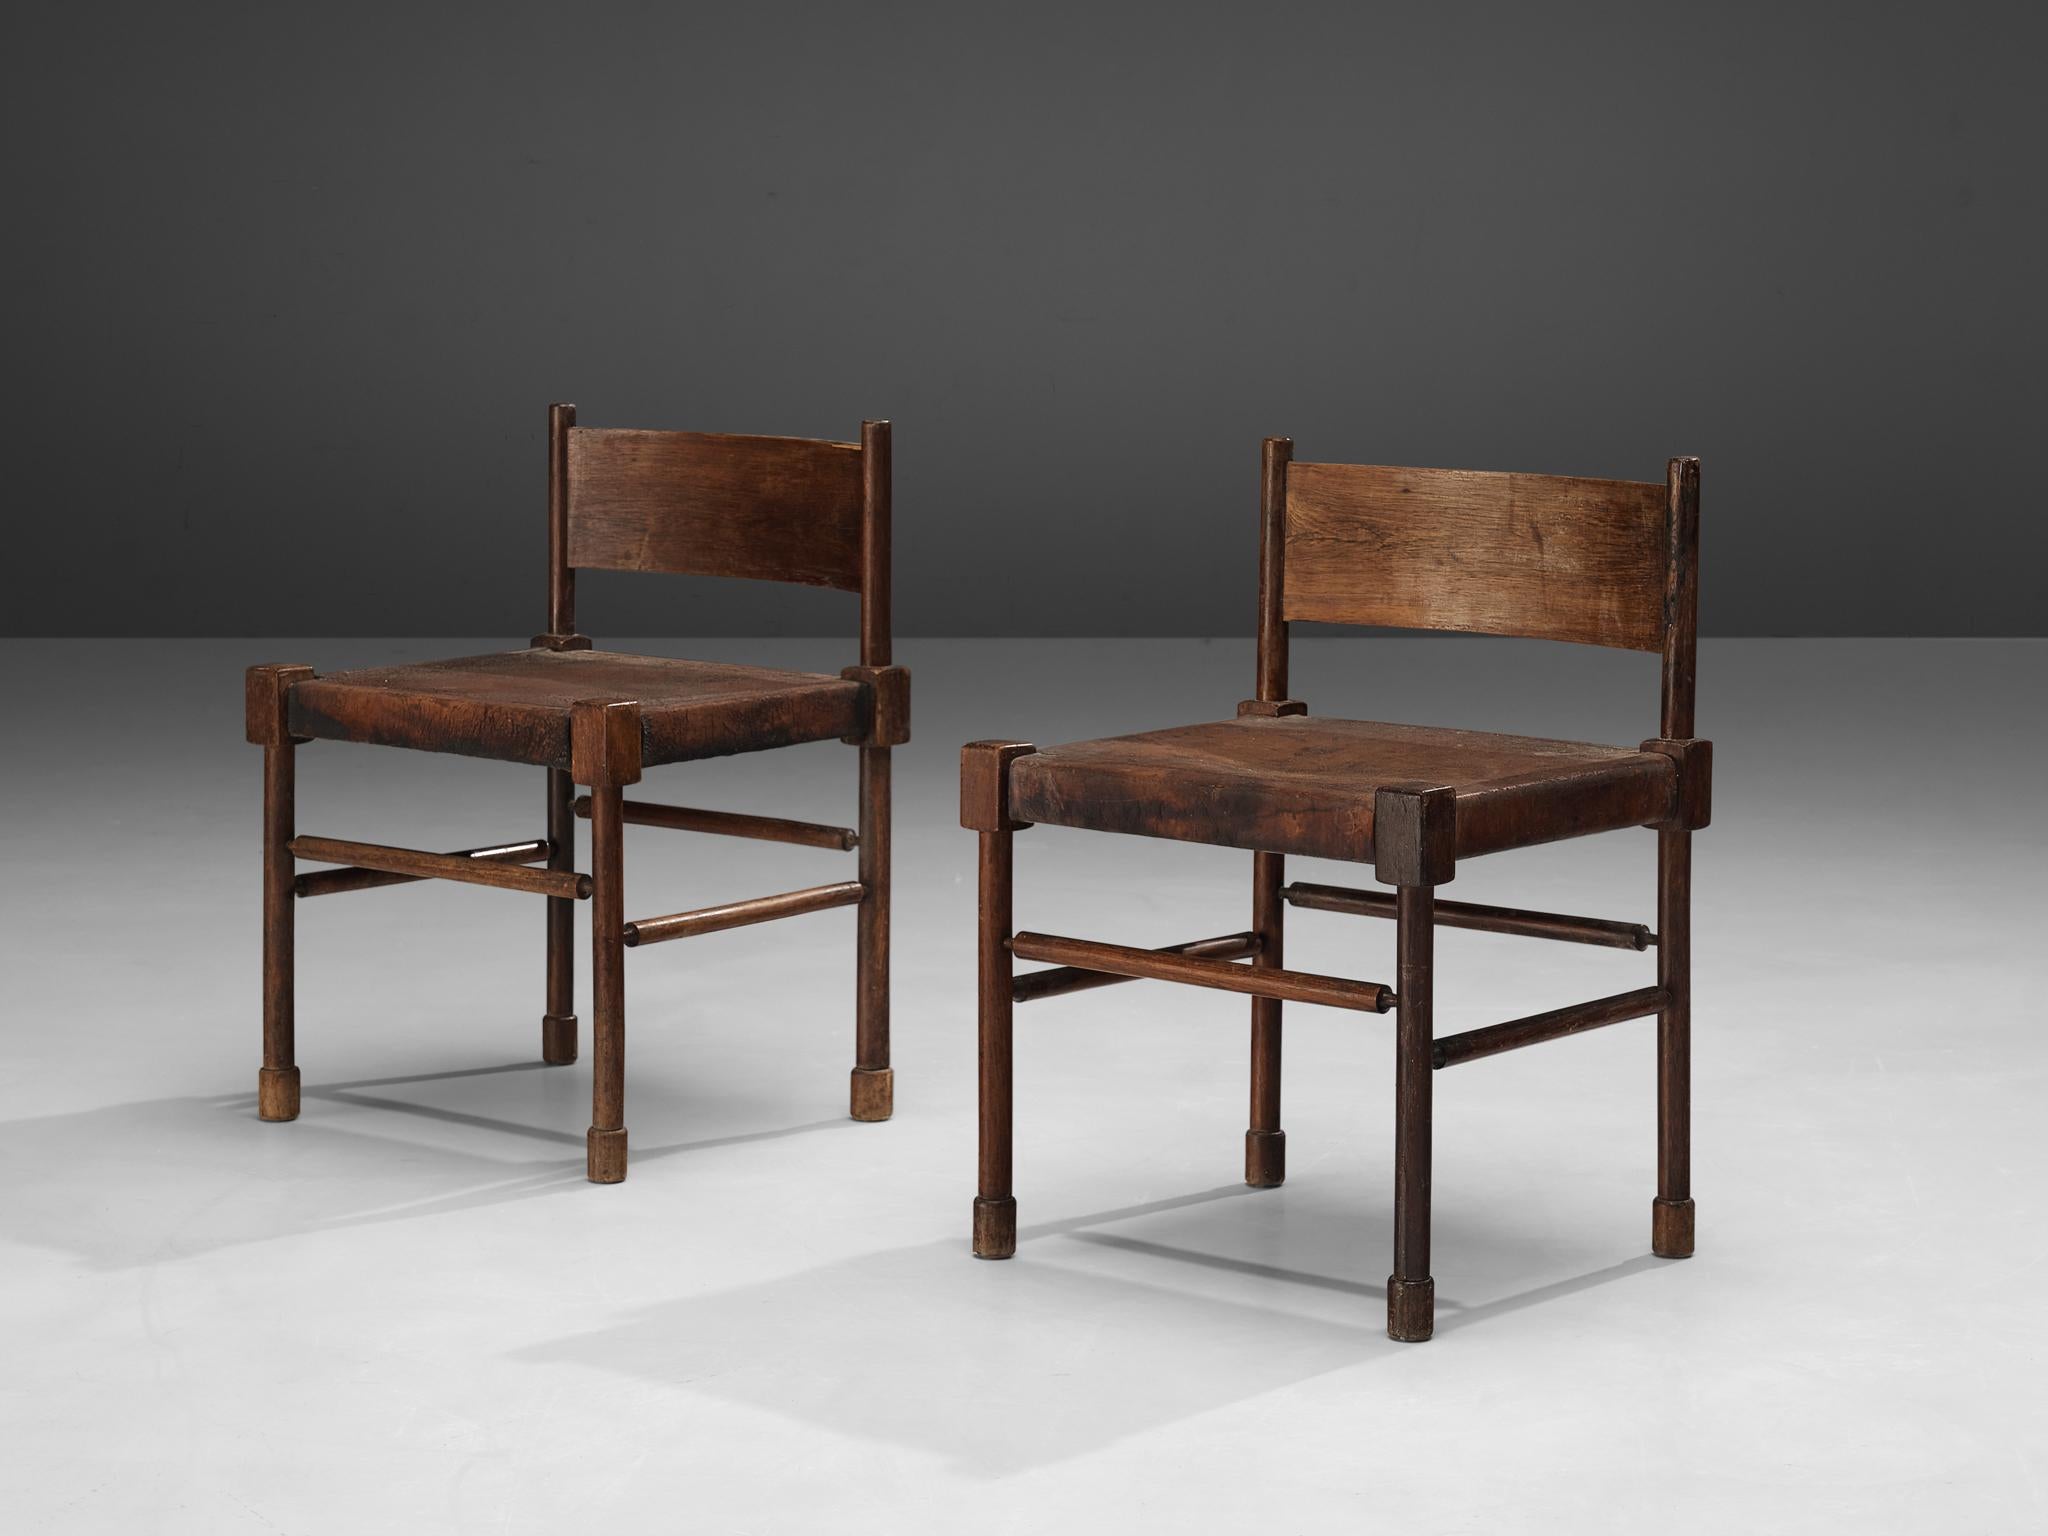 Side chairs, stained wood, patinated leather, Europe, 1940s

Rare side chairs with sculpted frame in stained wood and leather seats. What makes this design so unique is the way the designer played with proportions and shapes. The detailed carved